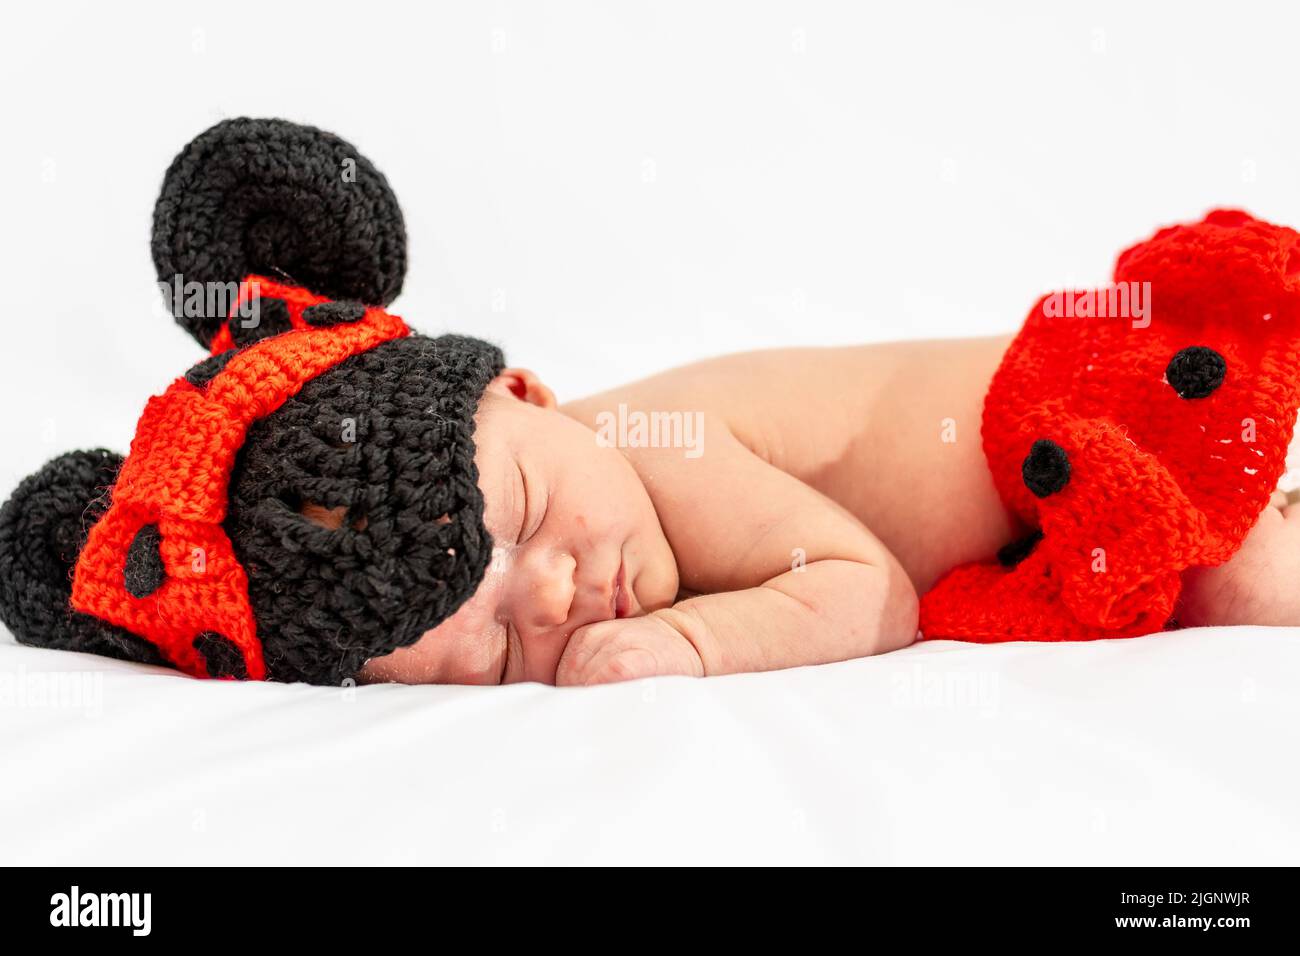 Studio photography of a newborn baby with days of life dressed as a little mouse with a hat with ears and a handmade knitted skirt. Photographic book Stock Photo